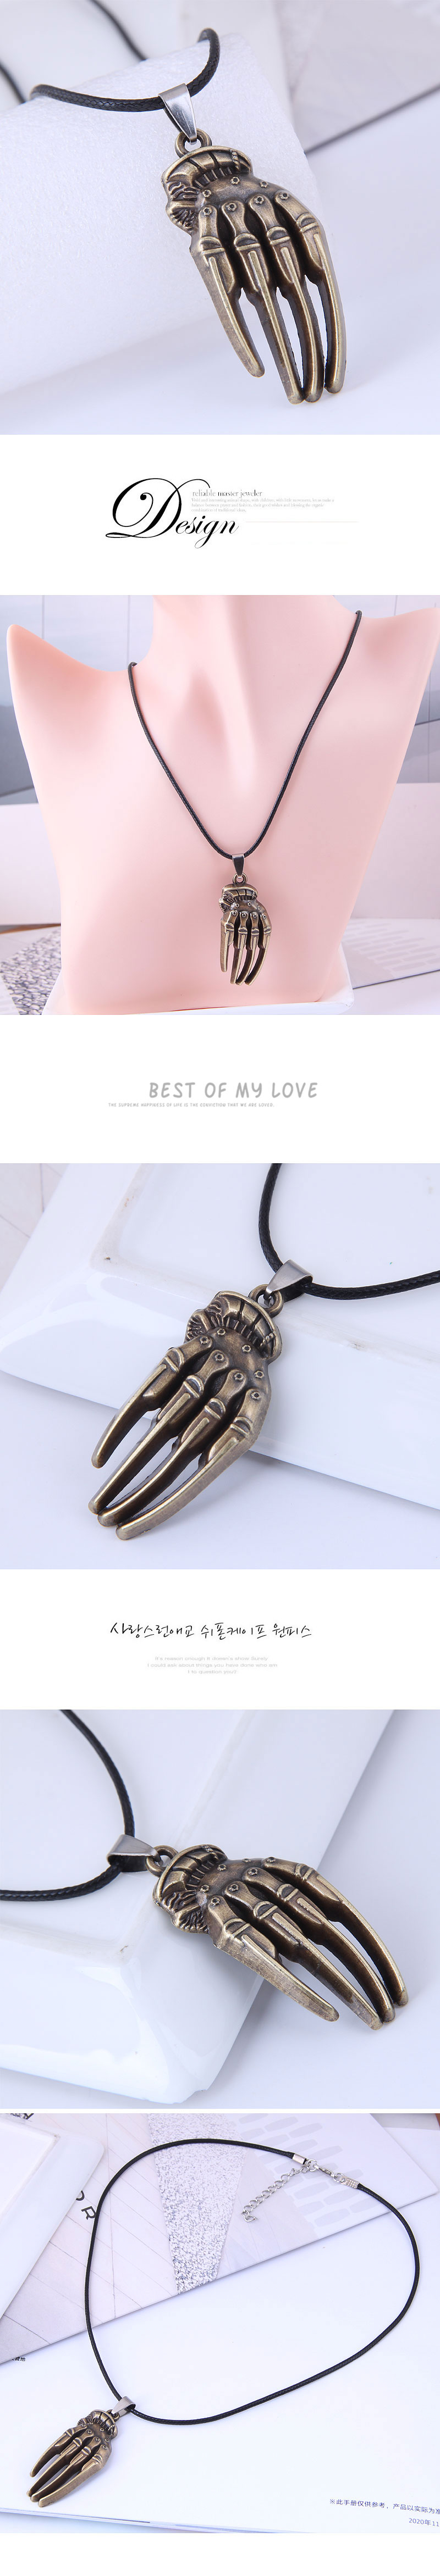 fashion new style concise handgrabbing wax rope necklacepicture1